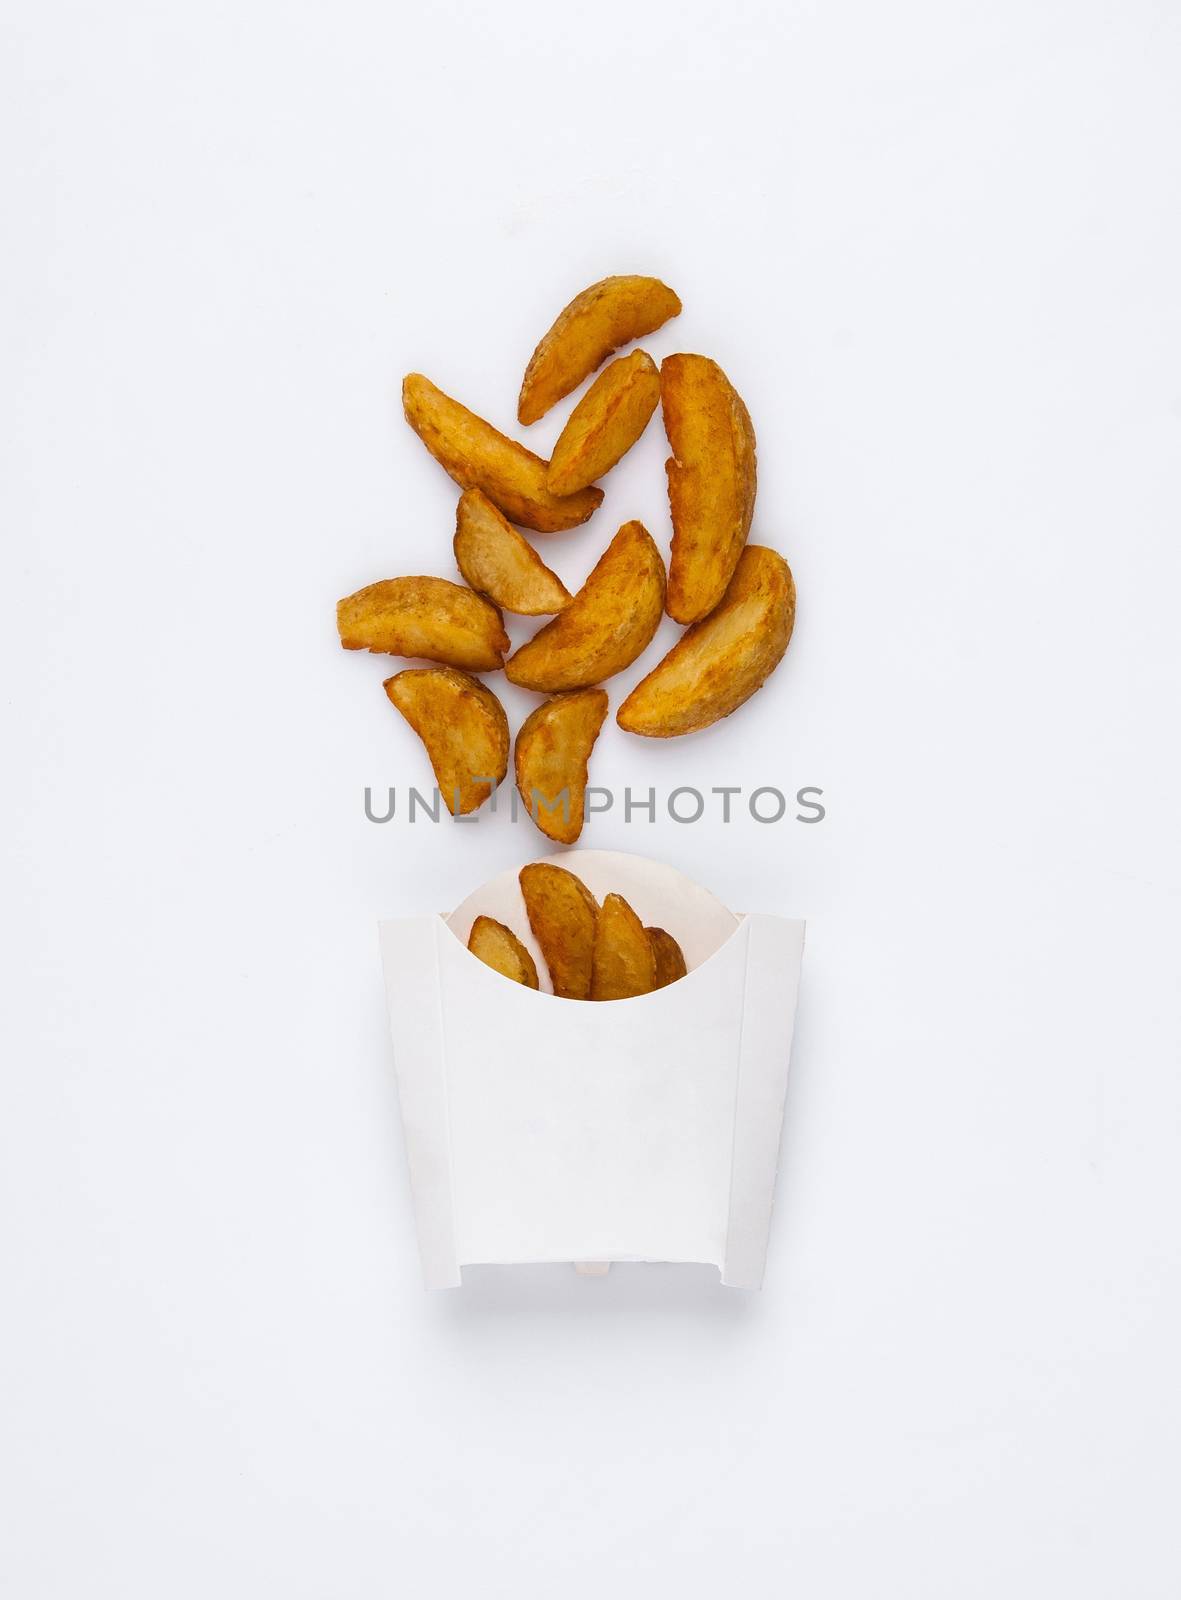 slices of fried potatoes in a white box on a white background. studio photo of fried french fries on white background